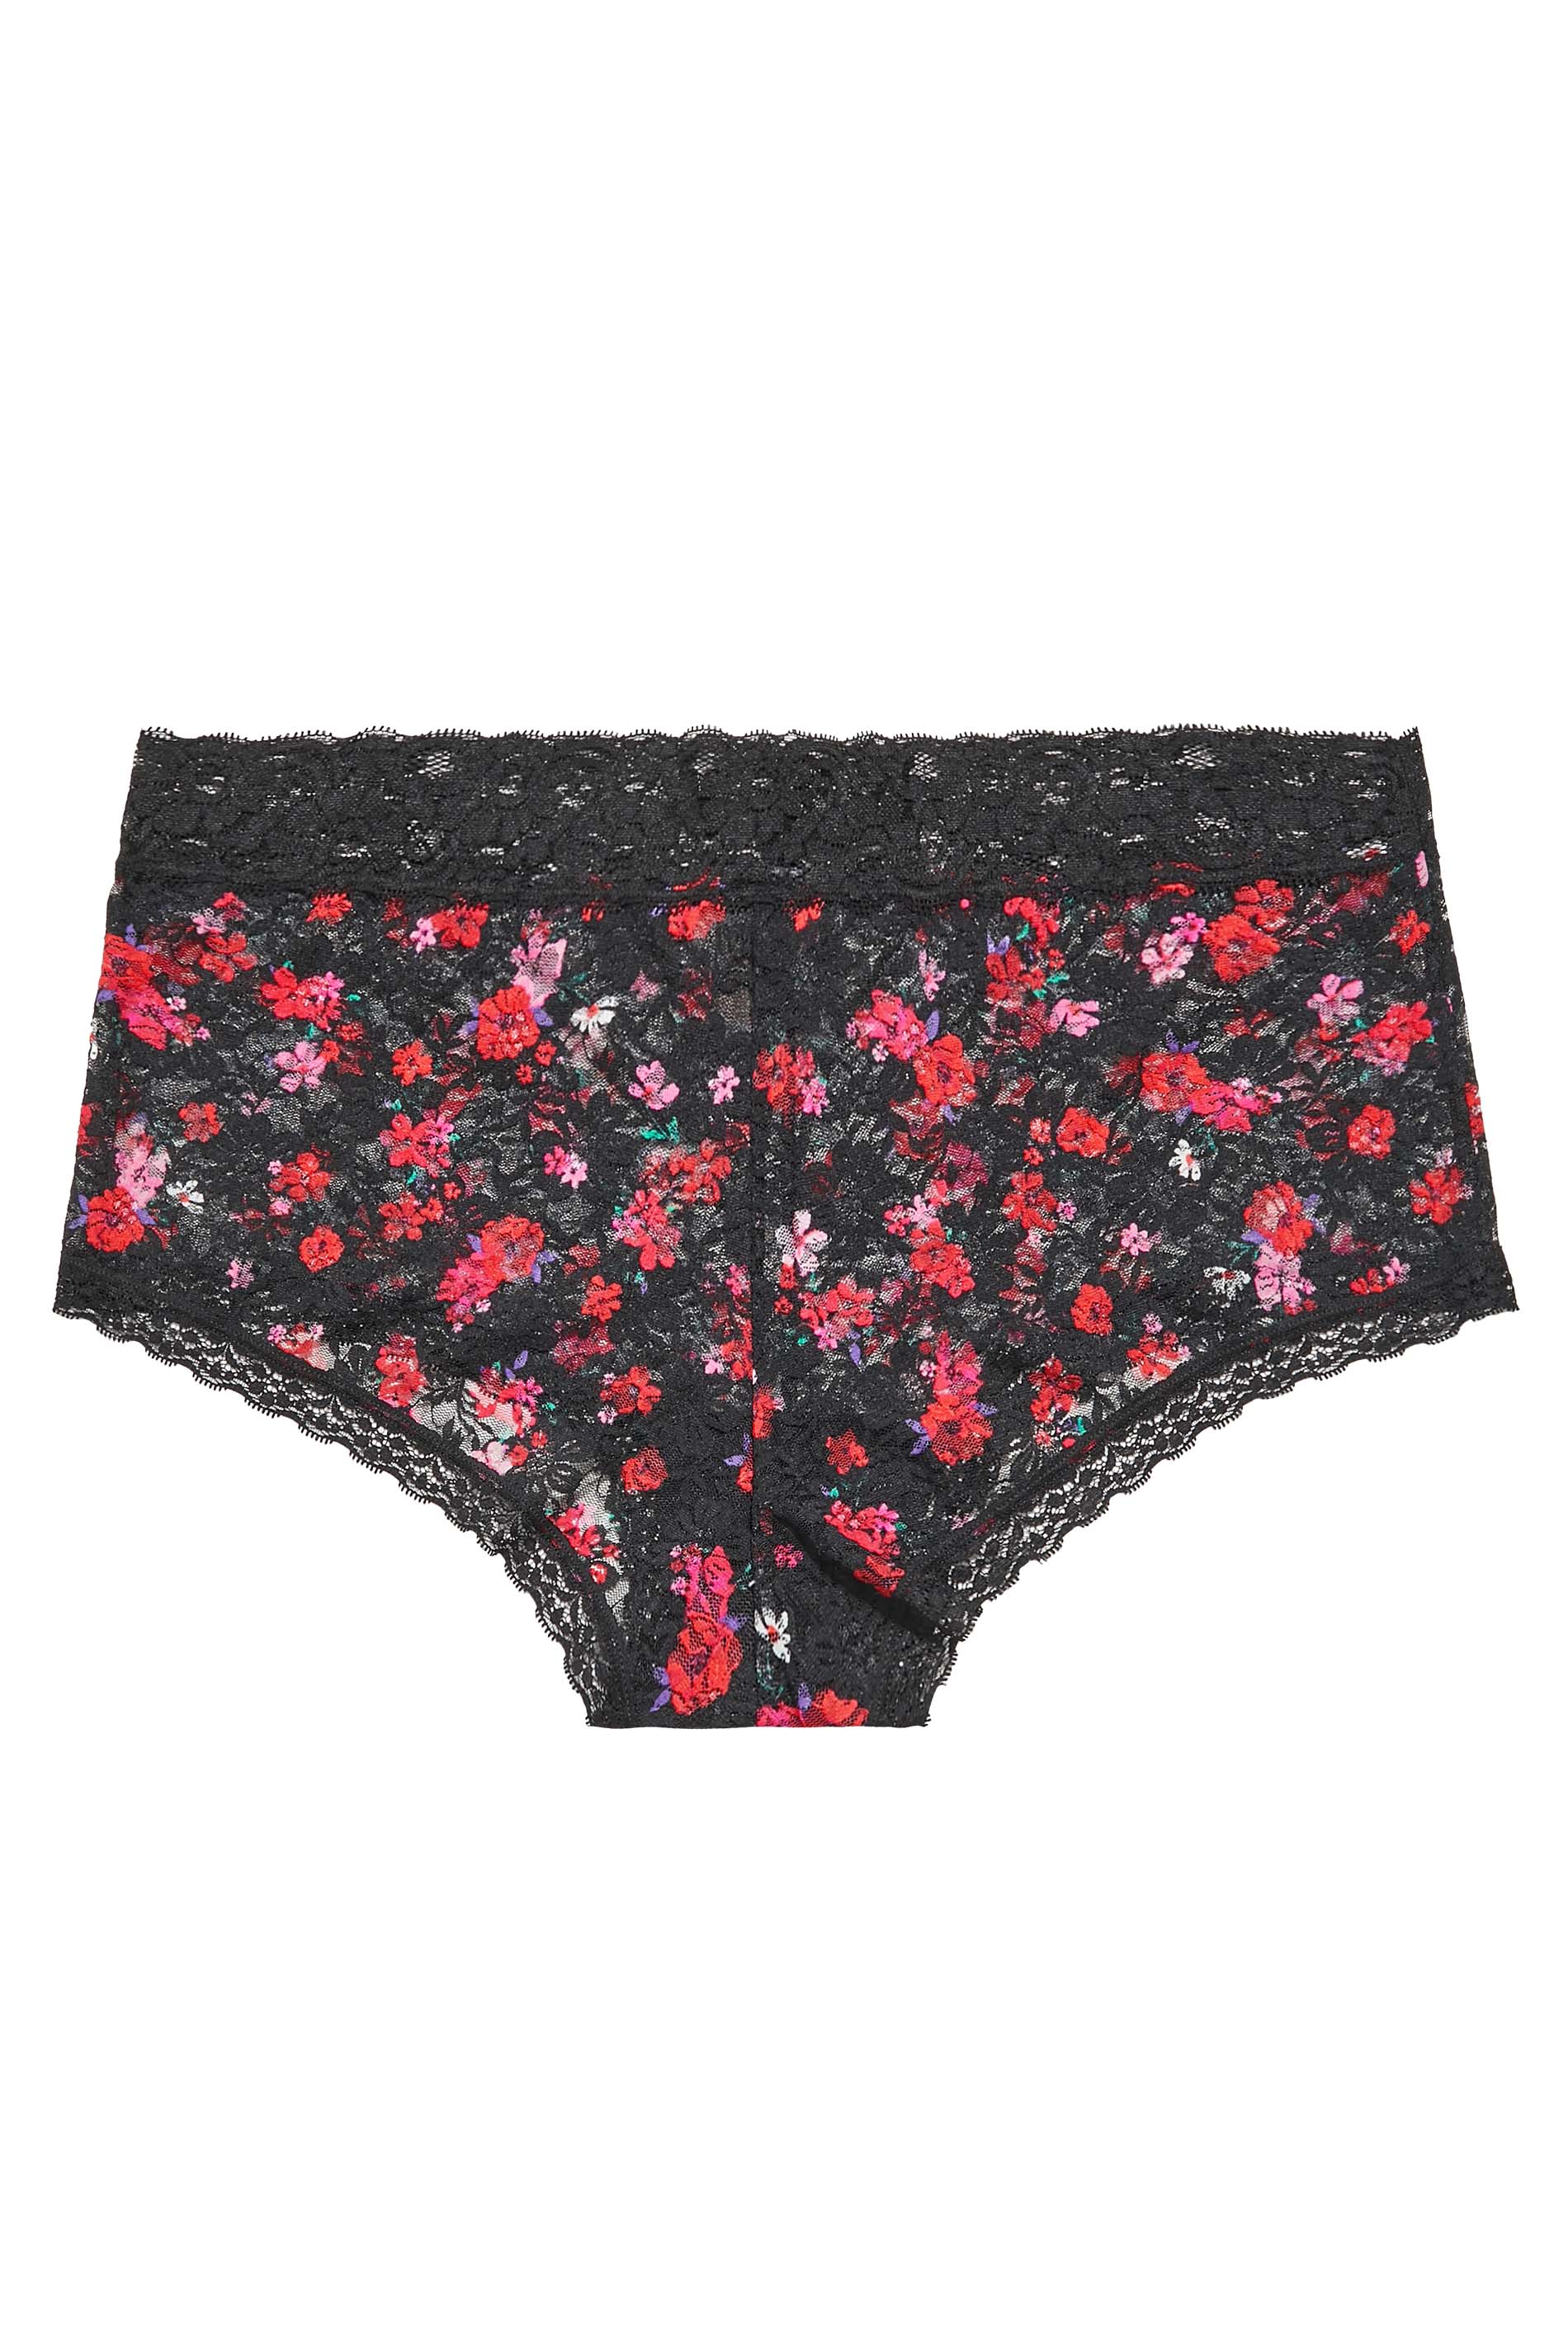 Plus Size 3 PACK Black & Red Floral Lace Shorts